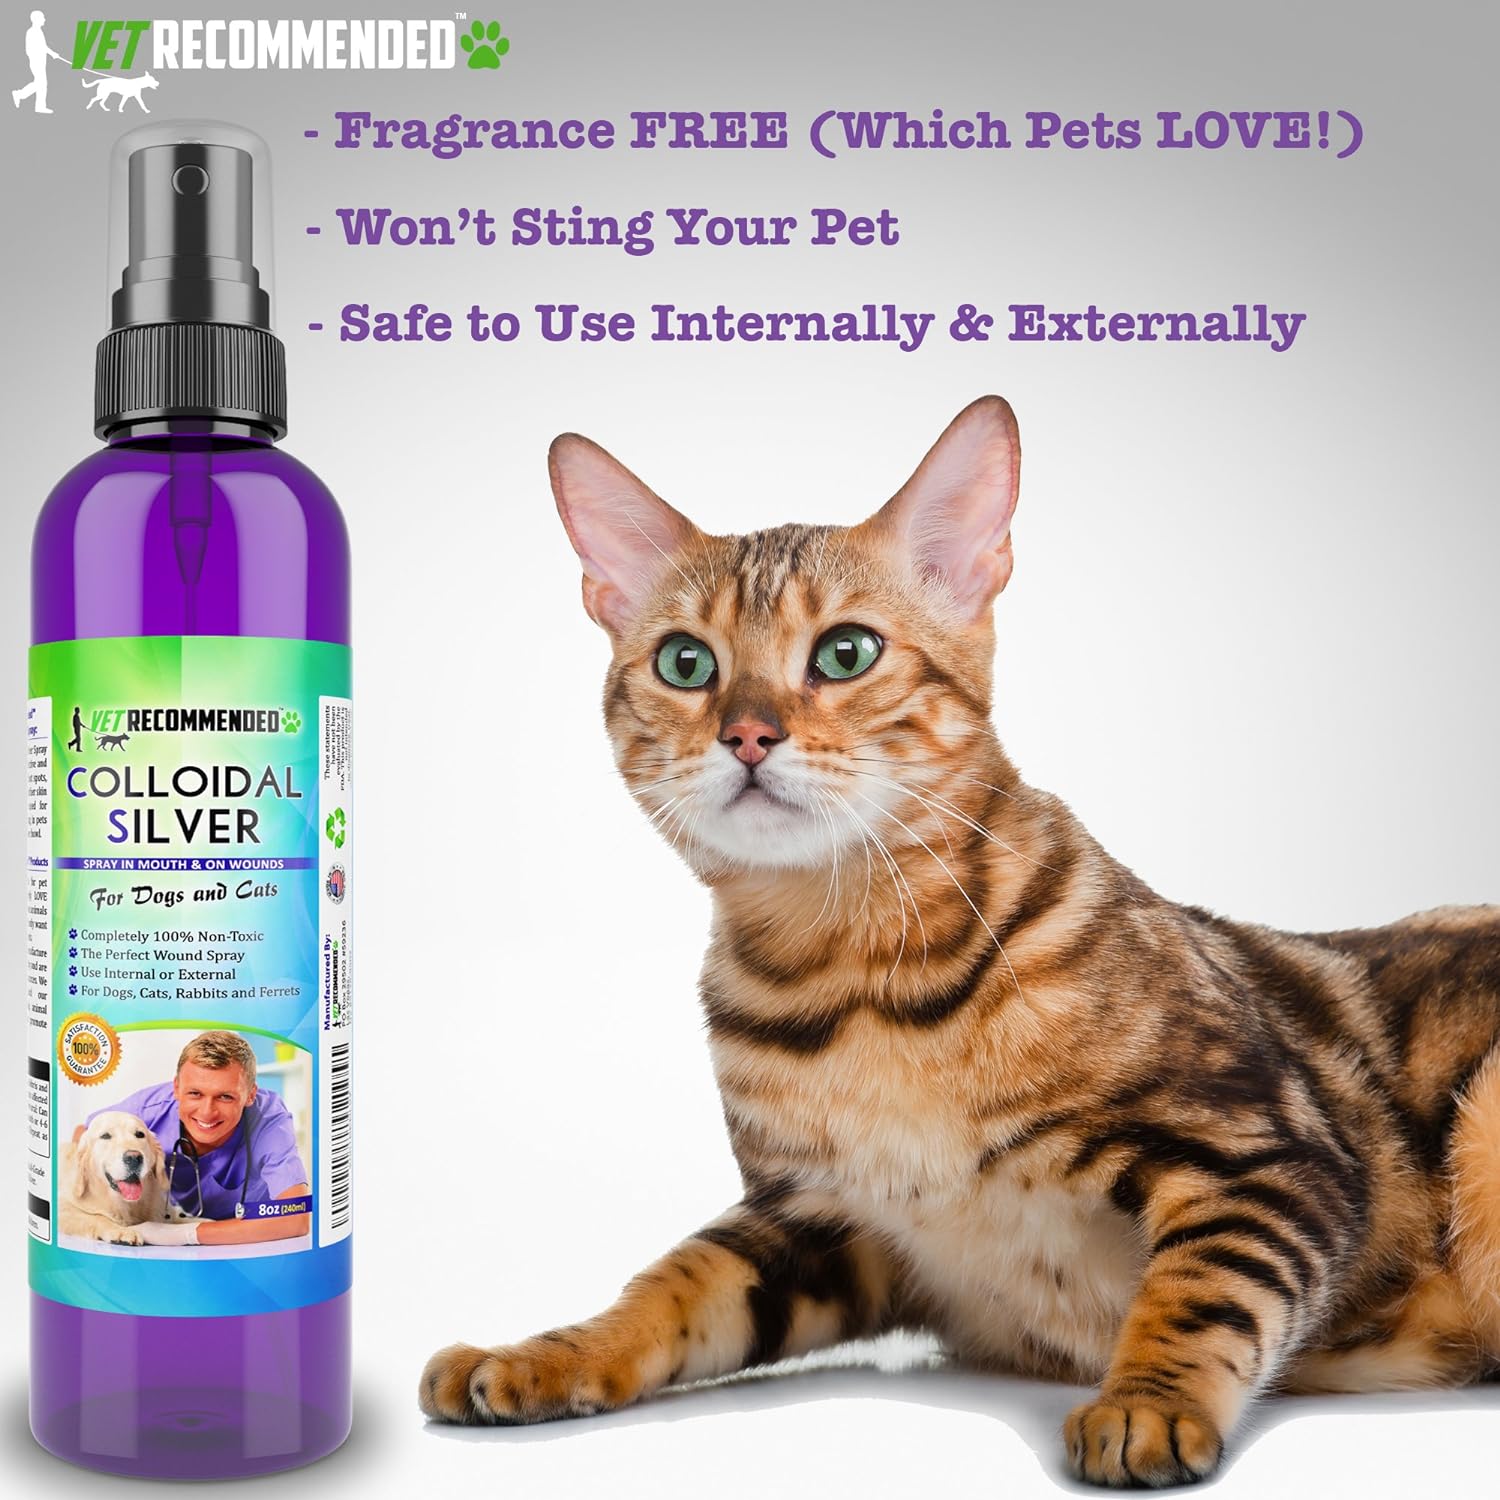 Vet Recommended Colloidal Silver for Dogs and Cats, Colloidal Silver Spray That Works as Natural Hot Spot Solution for Dogs - Made in USA (8oz/240ml) : Pet Supplies